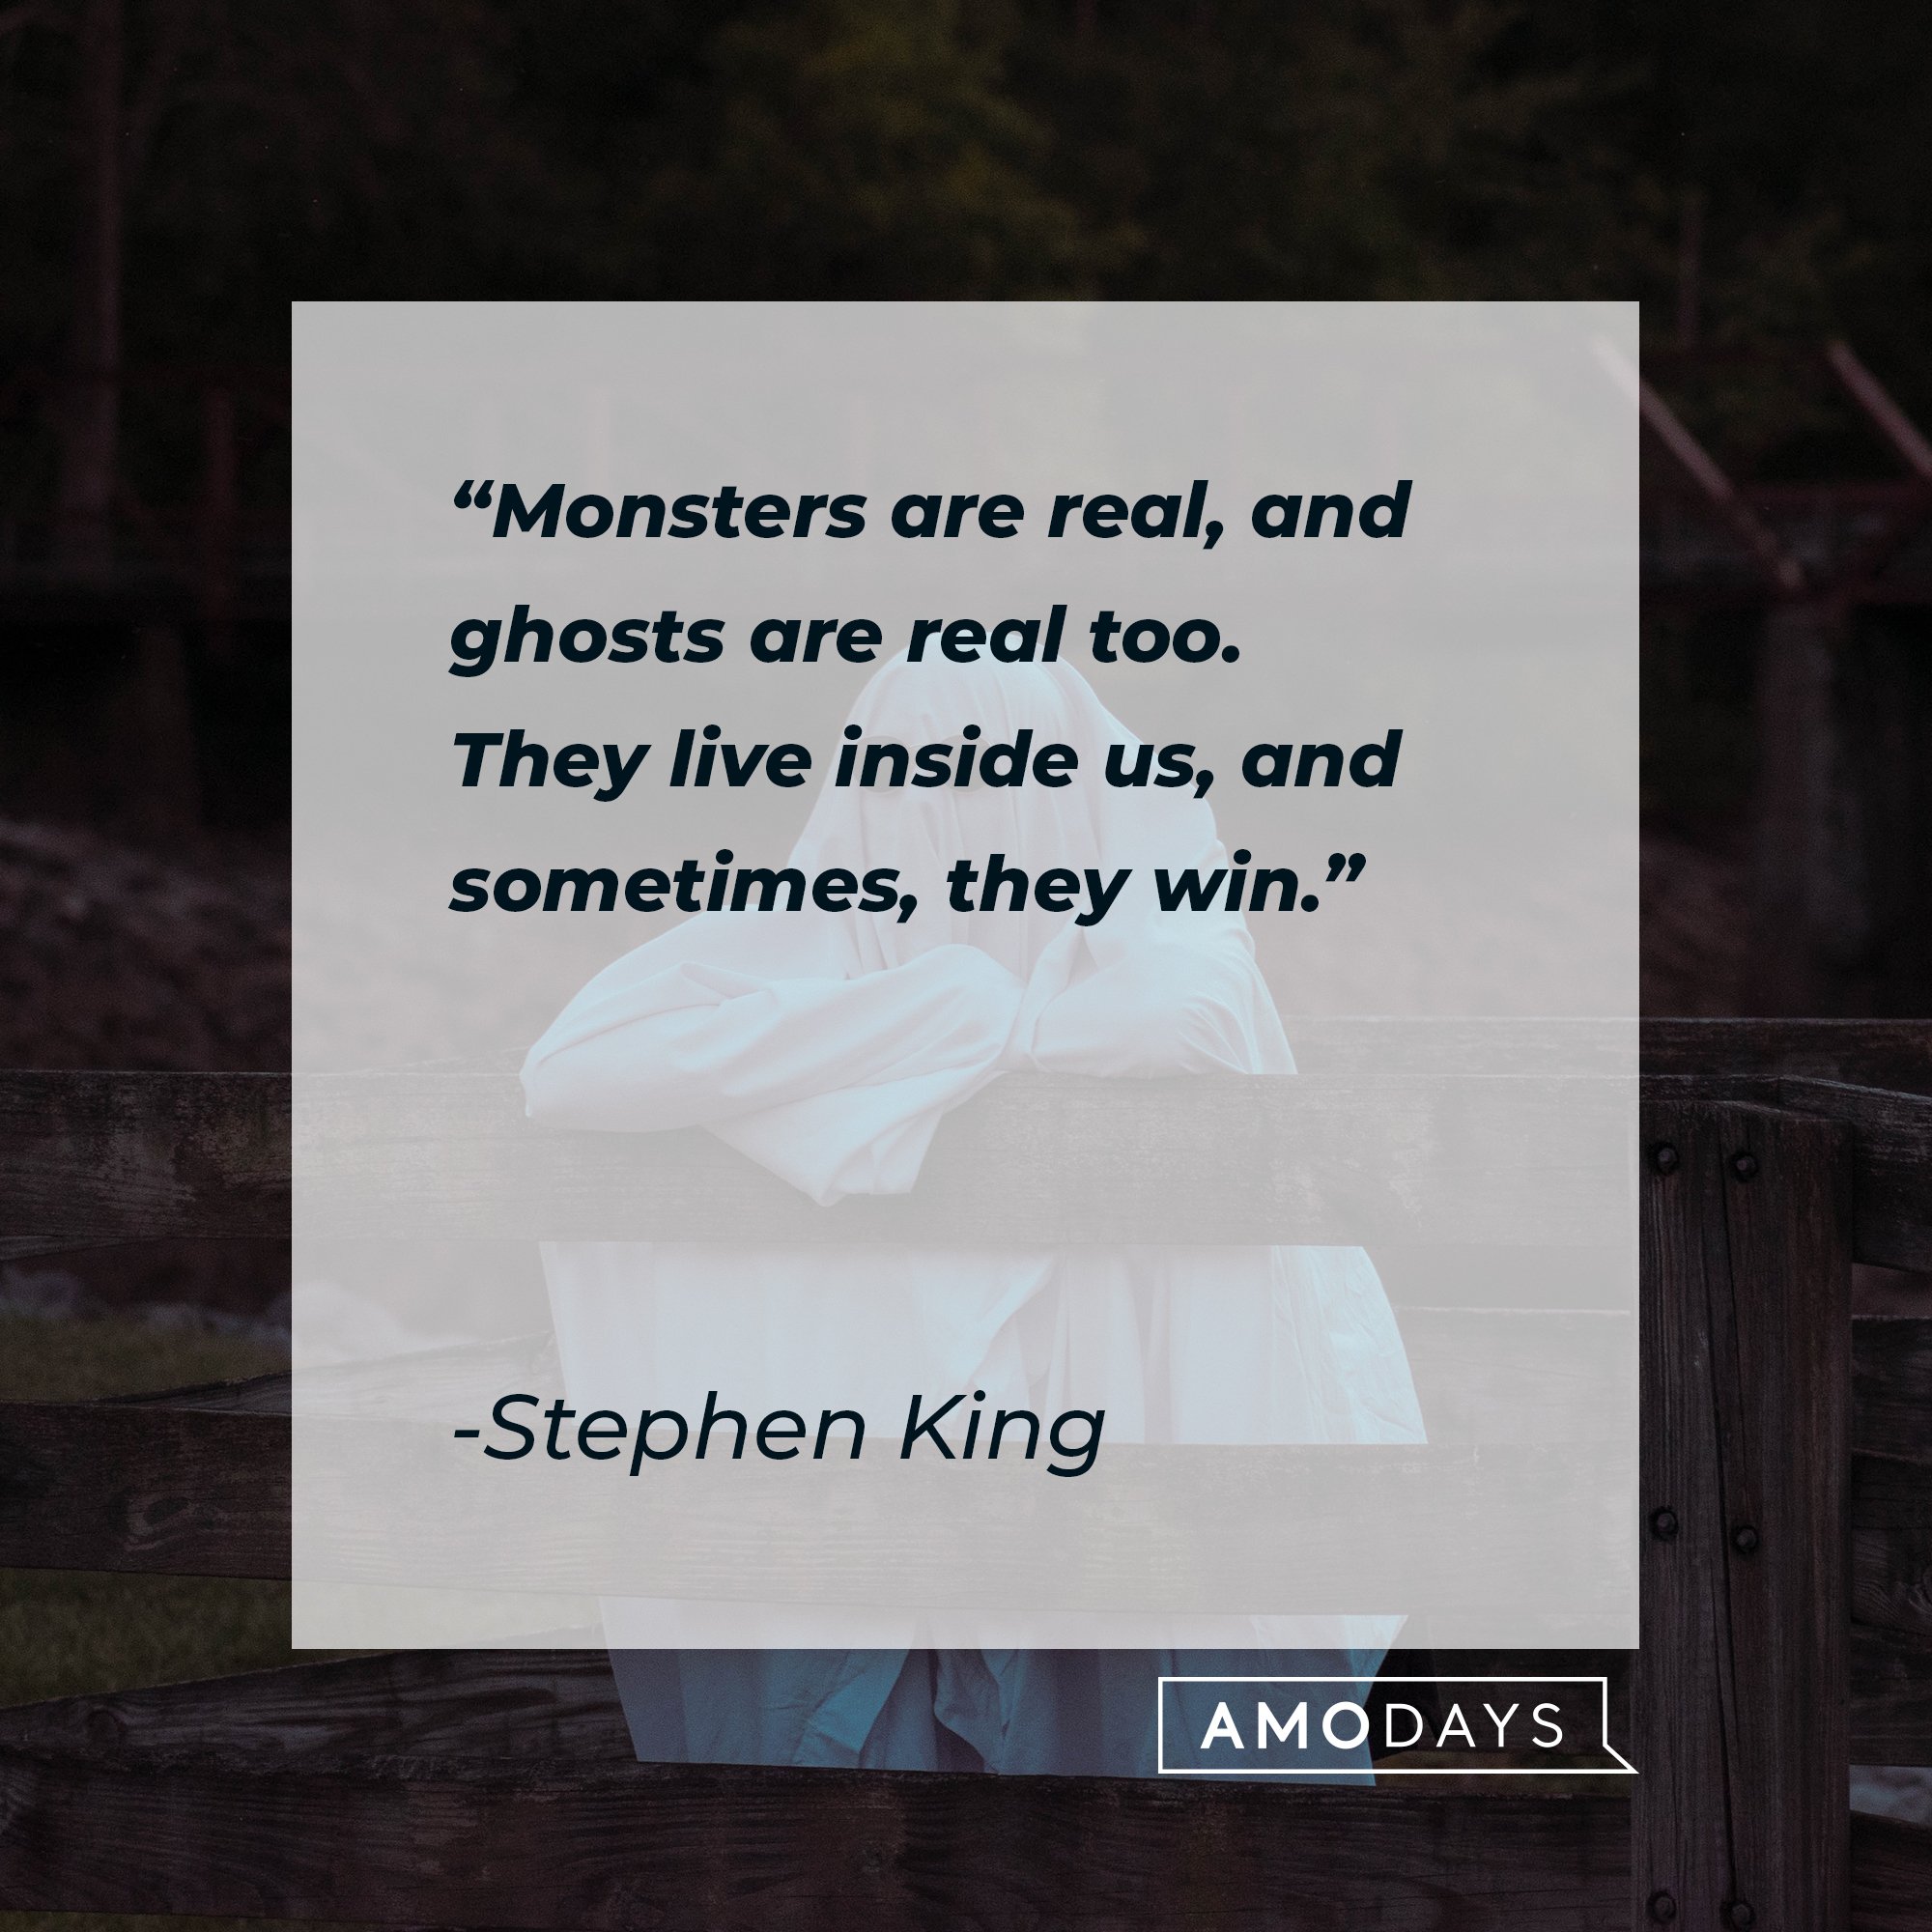 Stephen King’s quote: "Monsters are real, and ghosts are real too. They live inside us, and sometimes, they win." | Image: AmoDays 